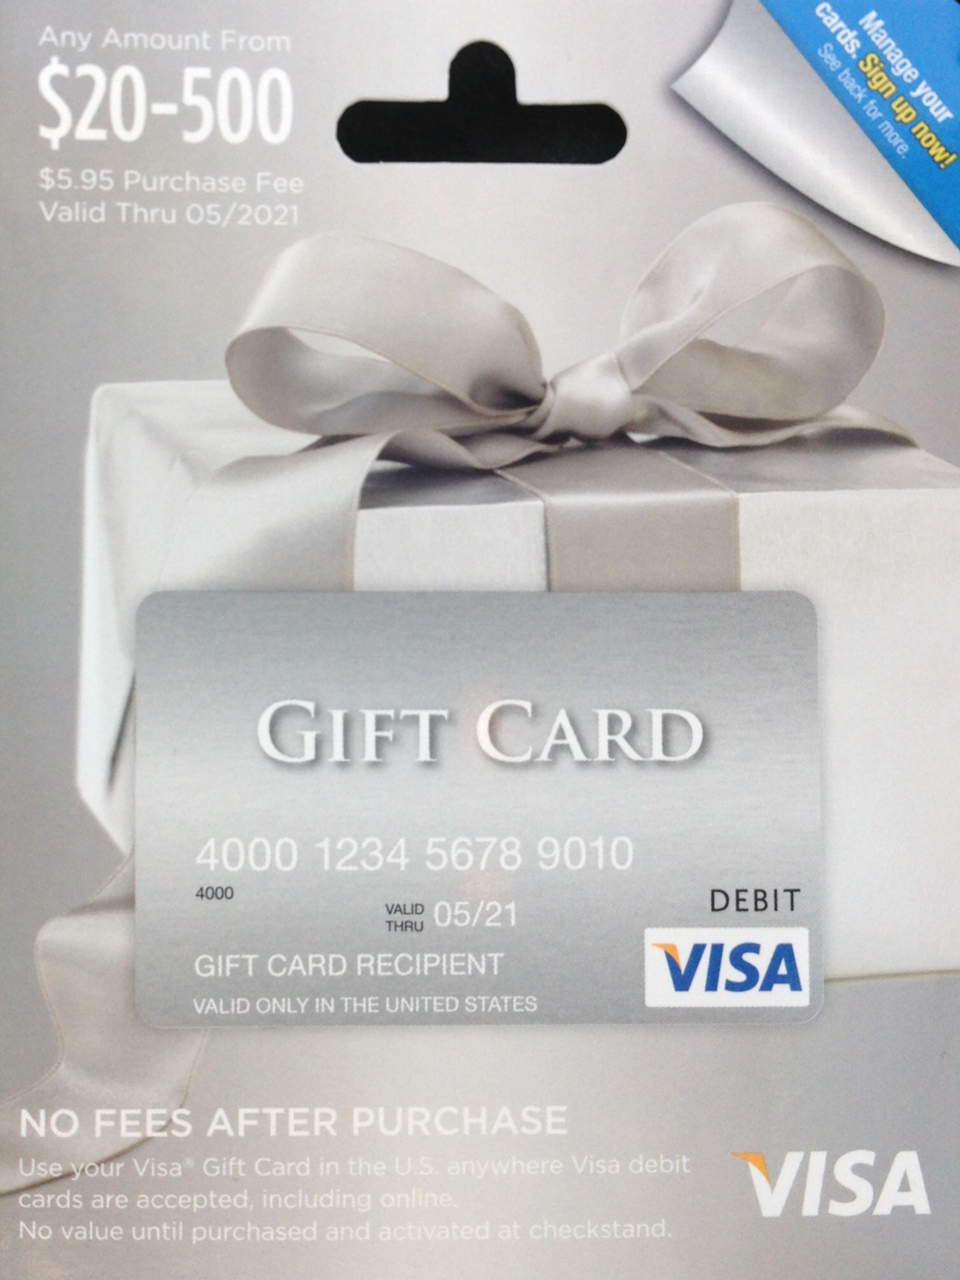 Visa Gift Card Ways To Save Money When Shopping Part 3